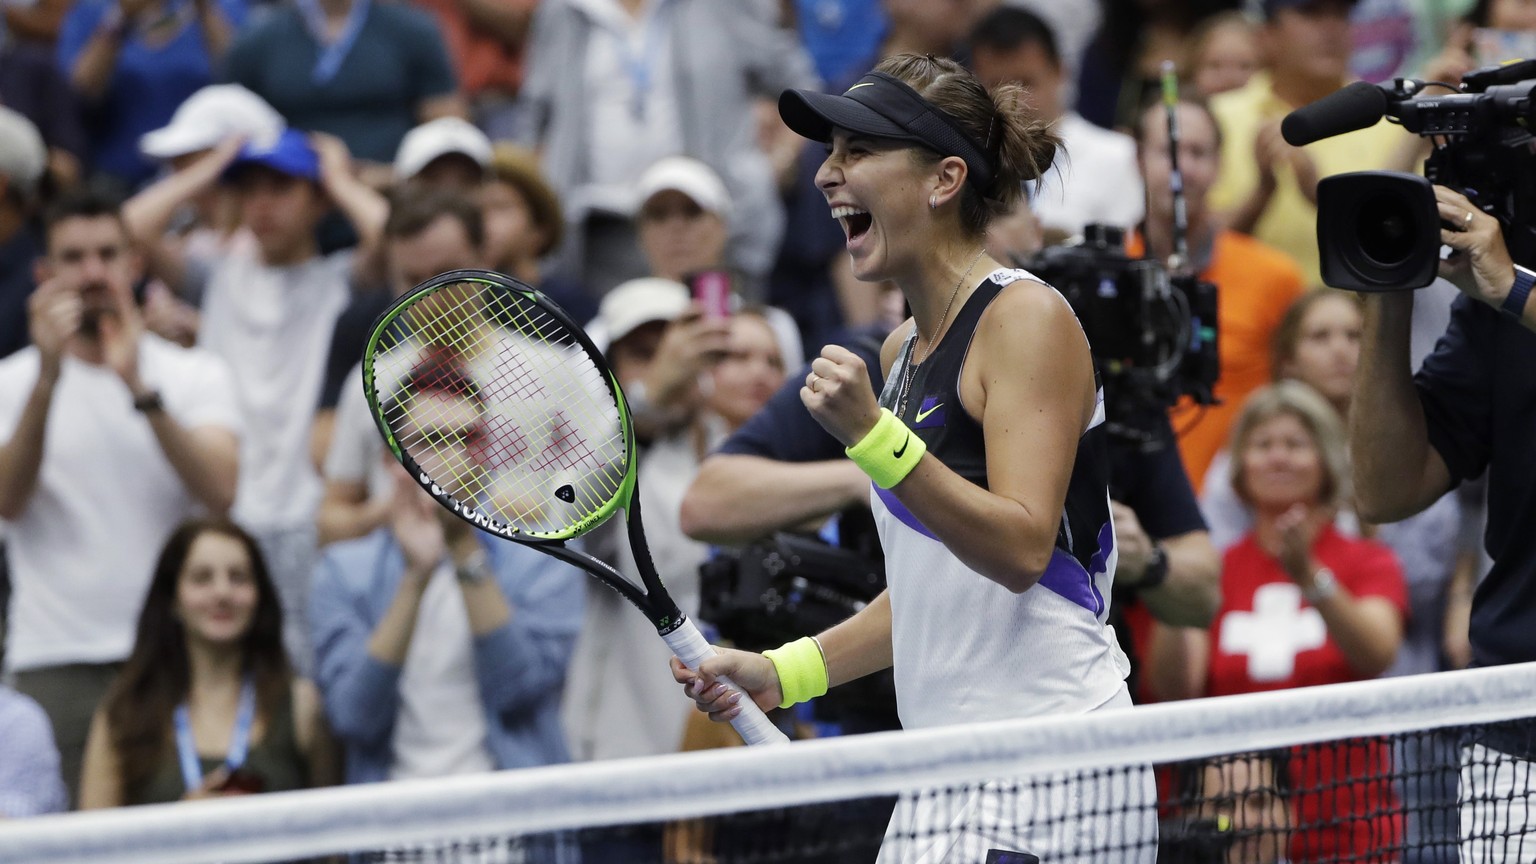 Belinda Bencic, of Switzerland, reacts after defeating Naomi Osaka, of Japan, 7-5, 6-4 during the fourth round of the US Open tennis championships Monday, Sept. 2, 2019, in New York. (AP Photo/Frank F ...